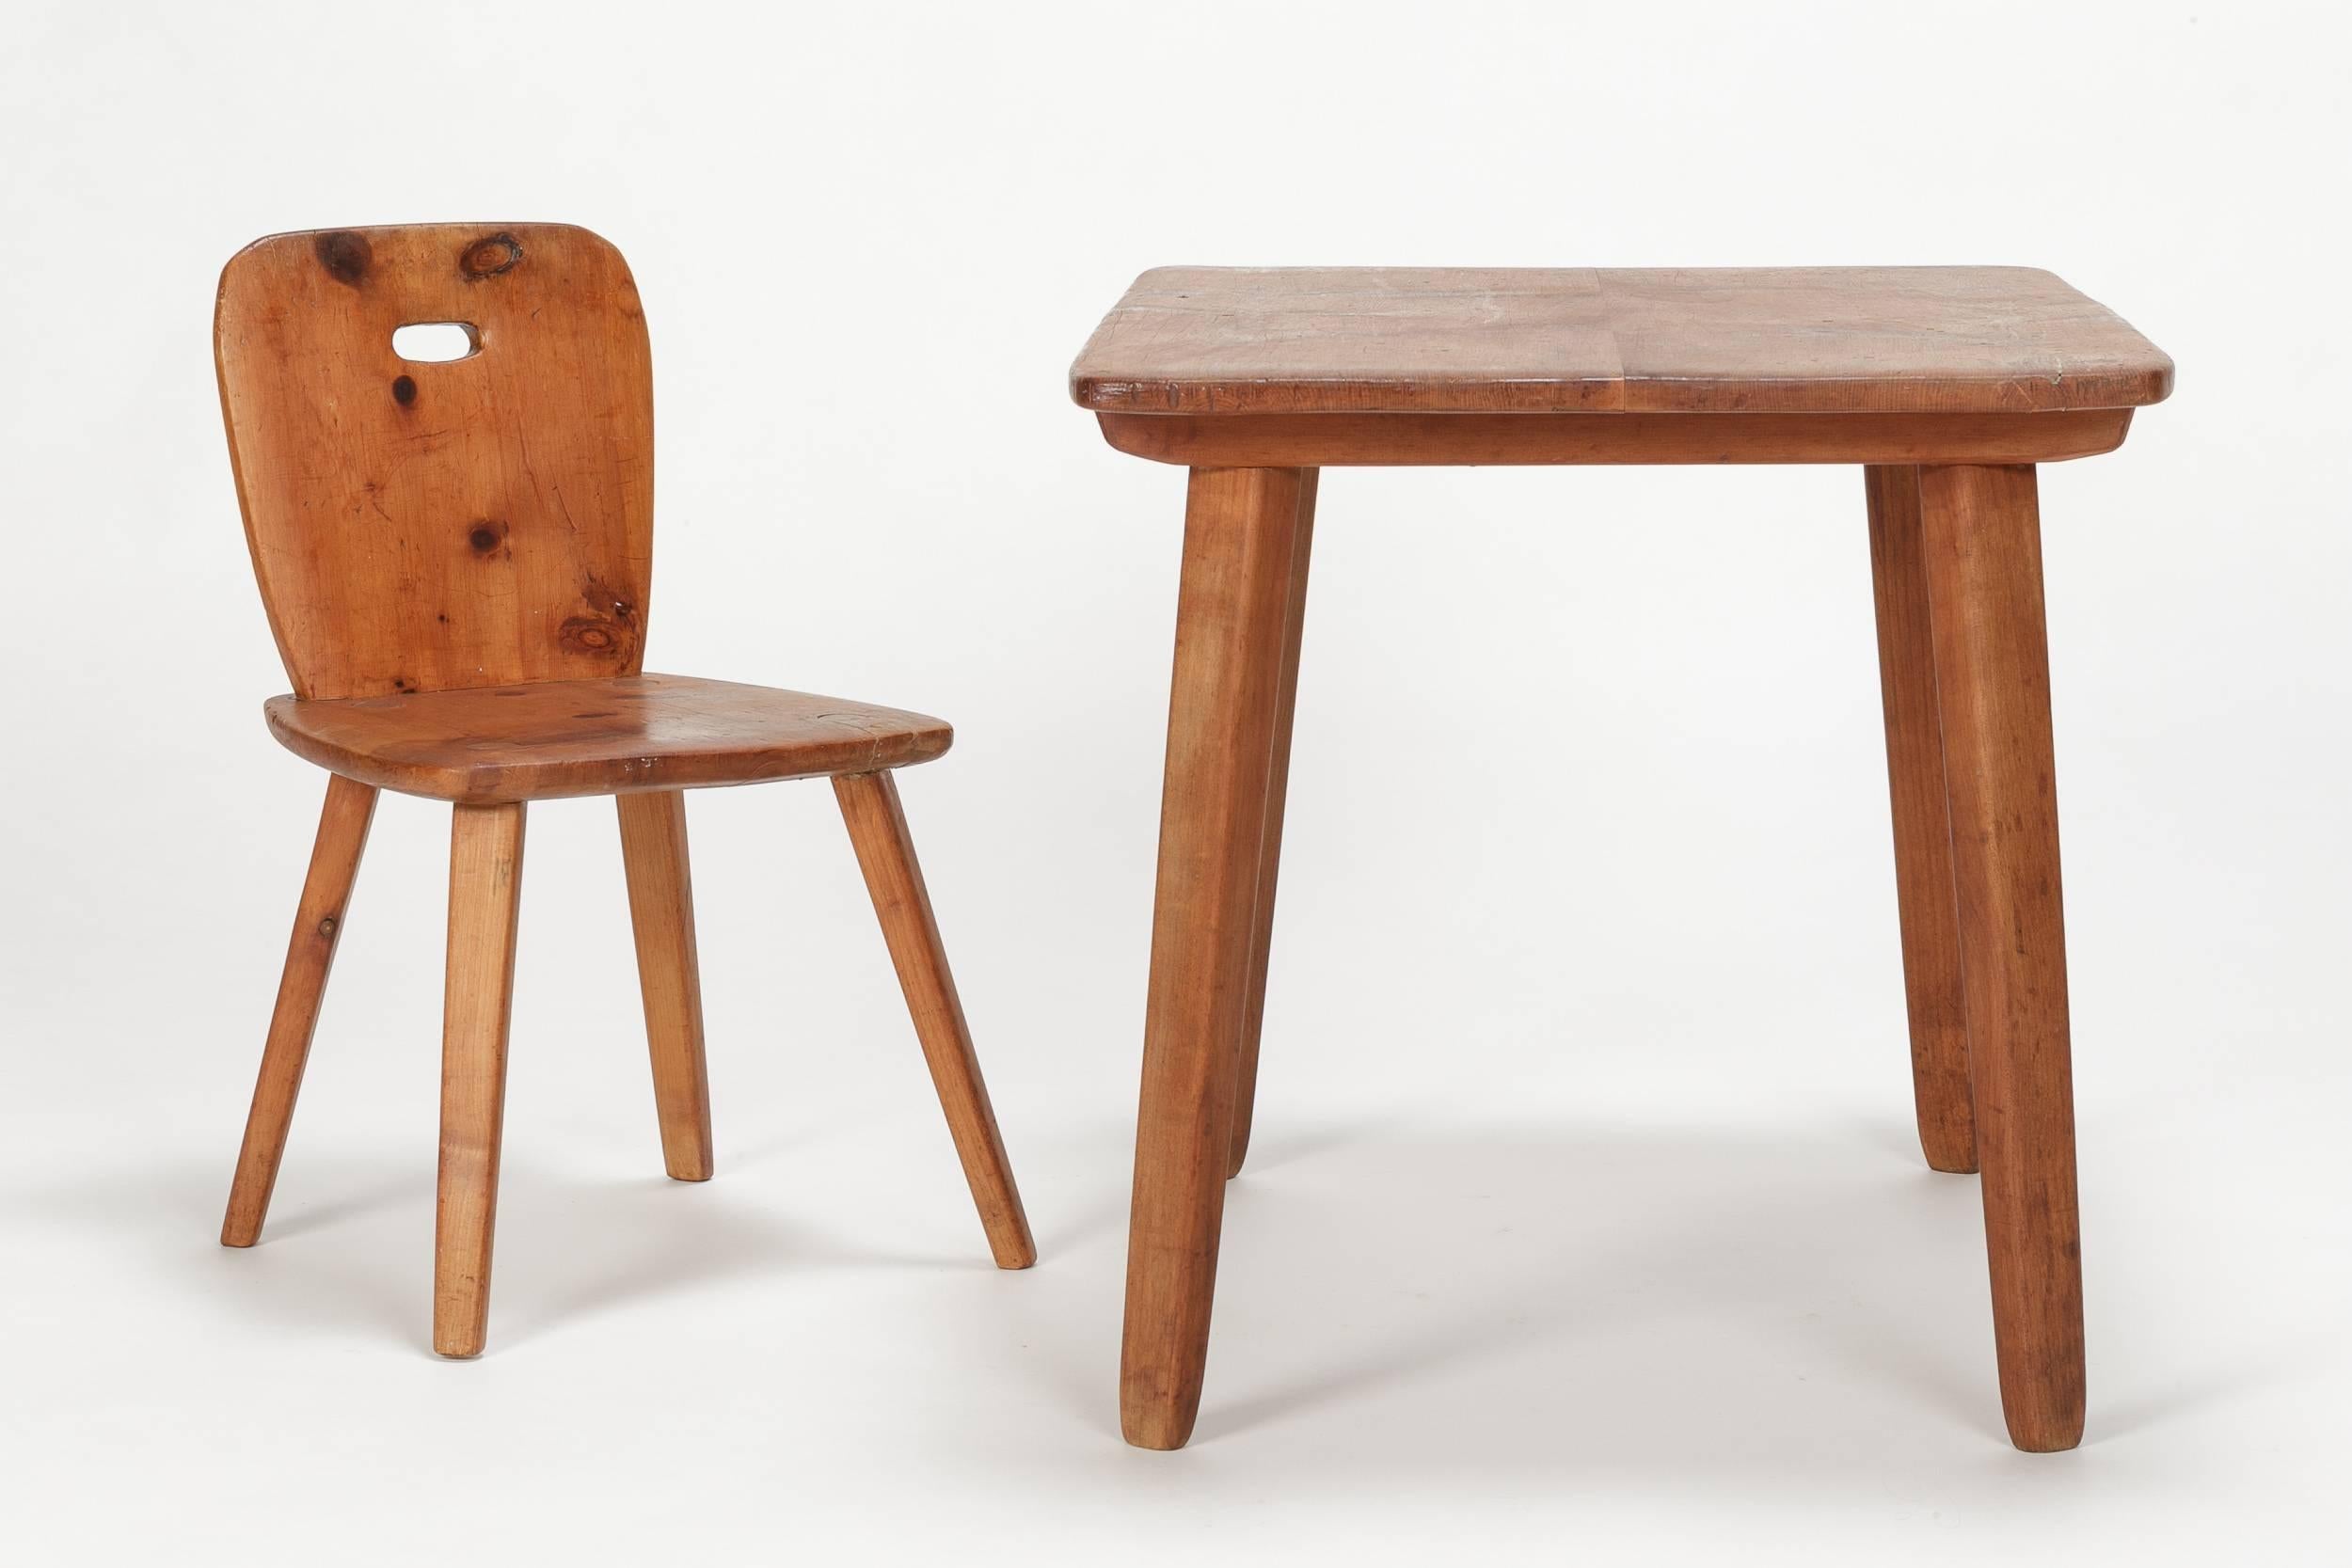 Swiss design by Jacob Müller. A children’s table with the matching chair made of ashwood, manufactured in his workshop in Zurich, Switzerland. This set was shown at the Swiss national exhibition in 1939 in Zurich (photo available on request). Solid